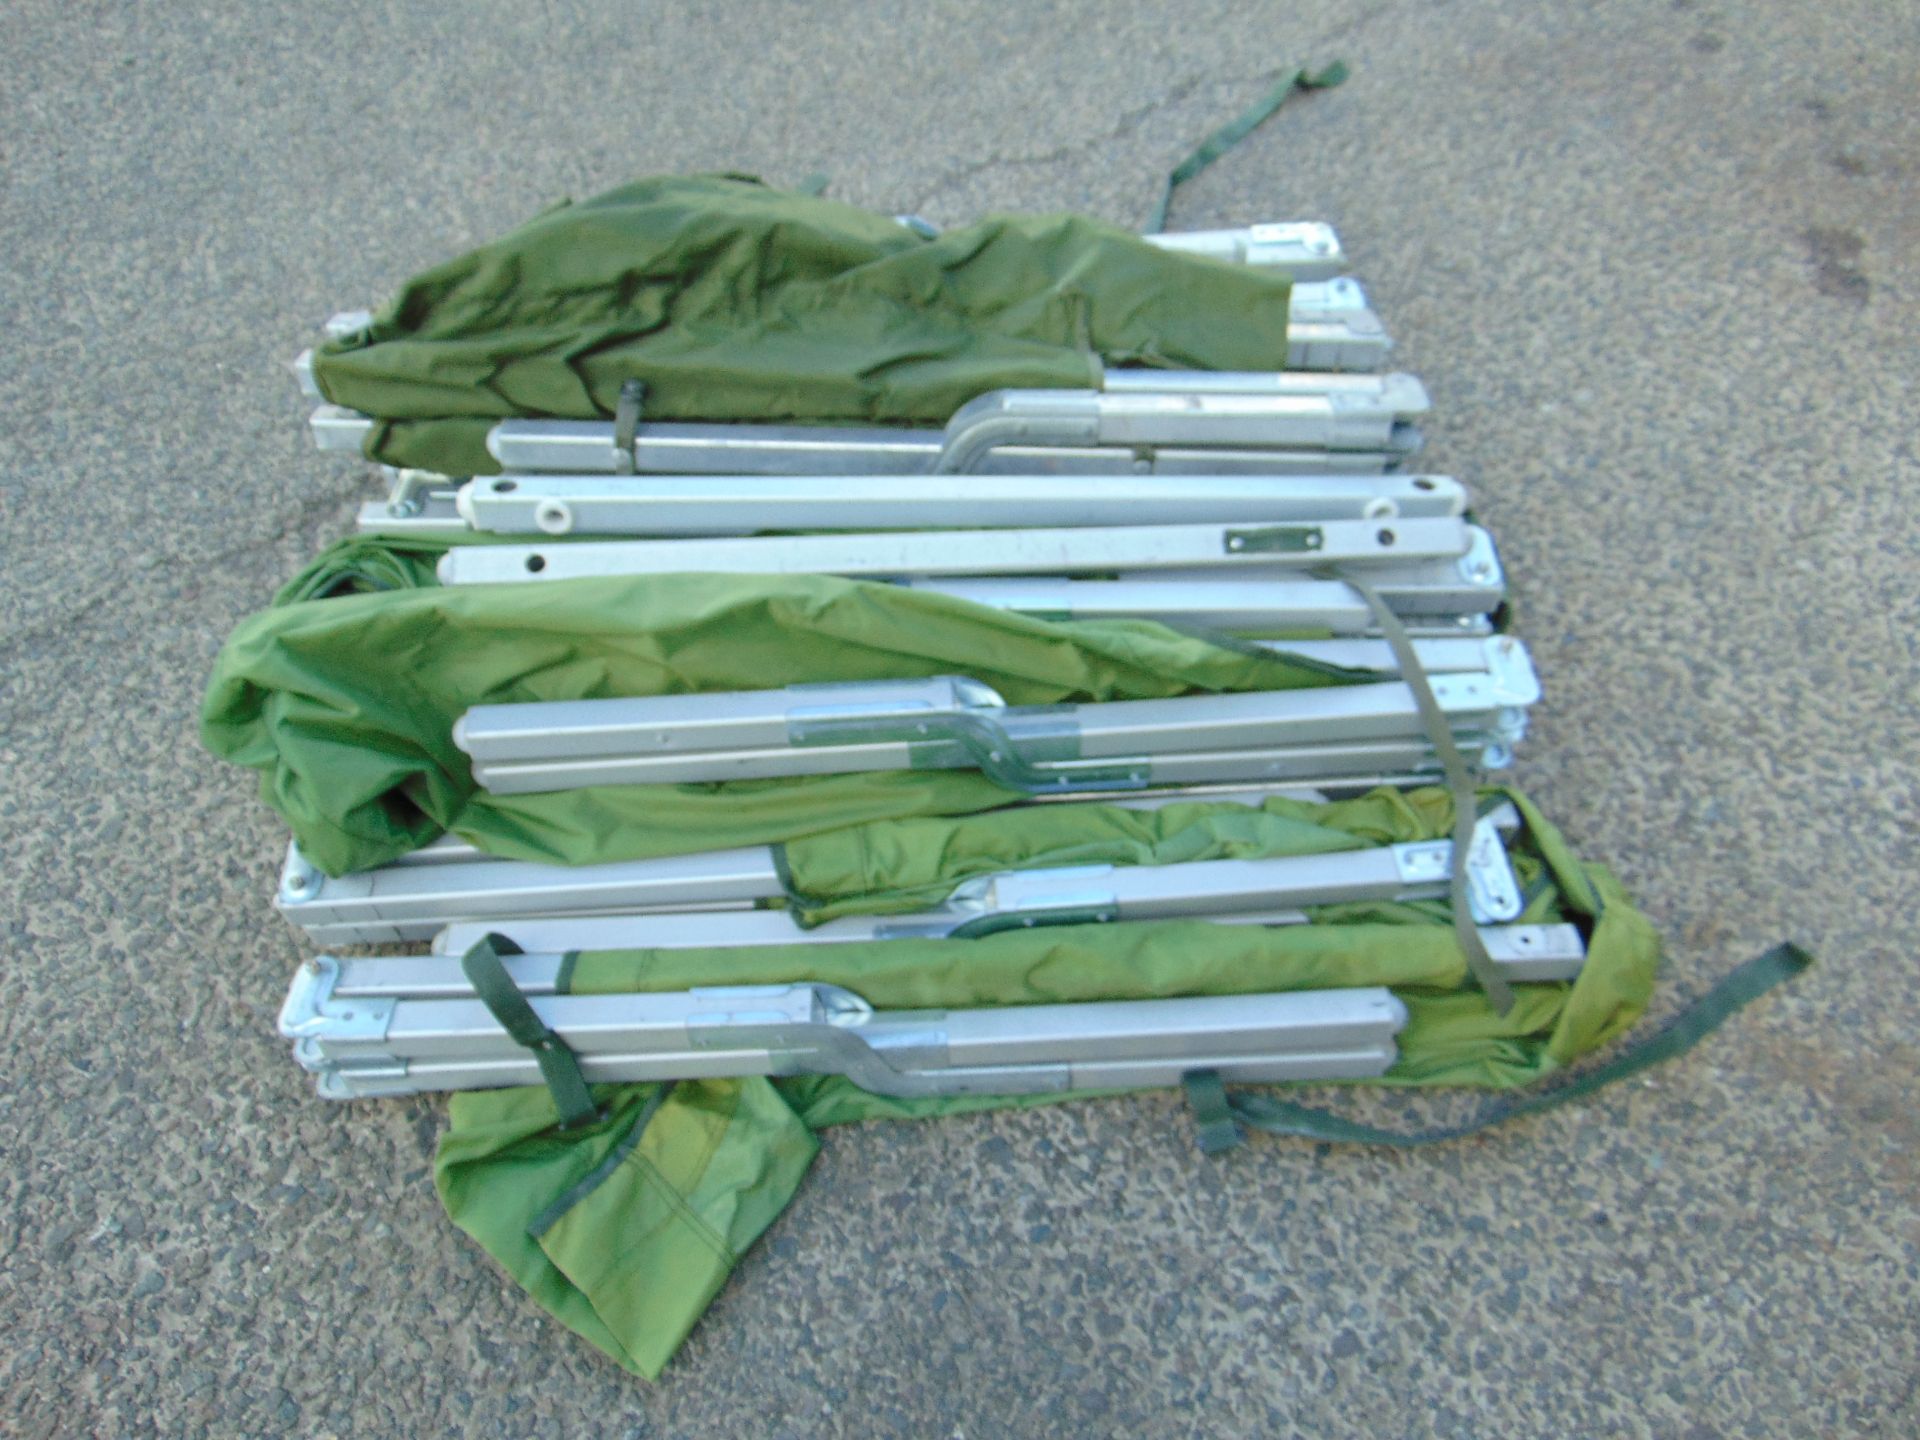 6 x Light Weight British Army Folding Camp Beds as shown